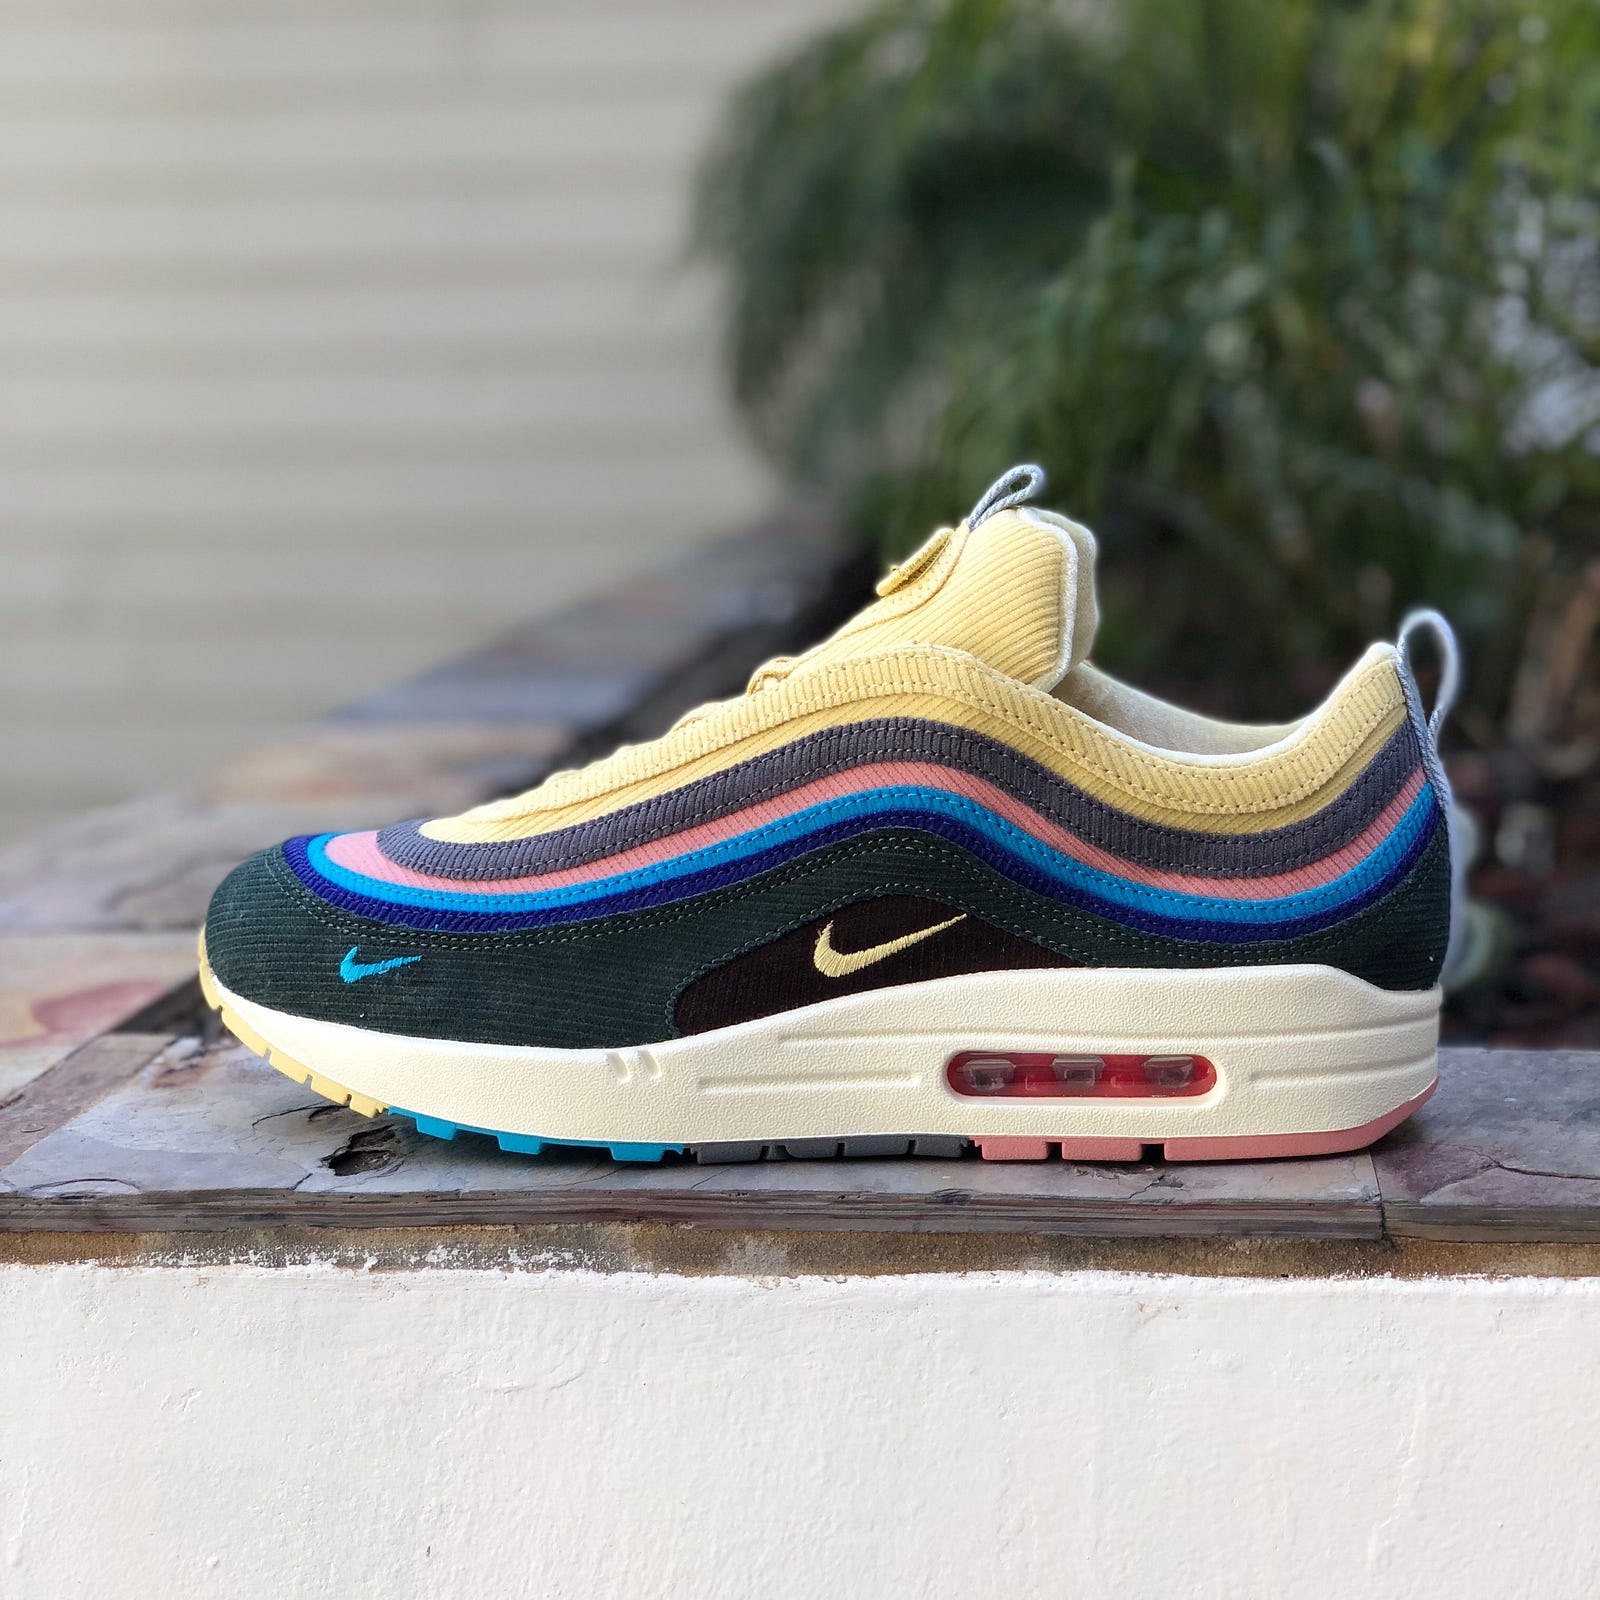 In Depth Sneaker Review: Nike Air Max 1/97 “Sean Wotherspoon”